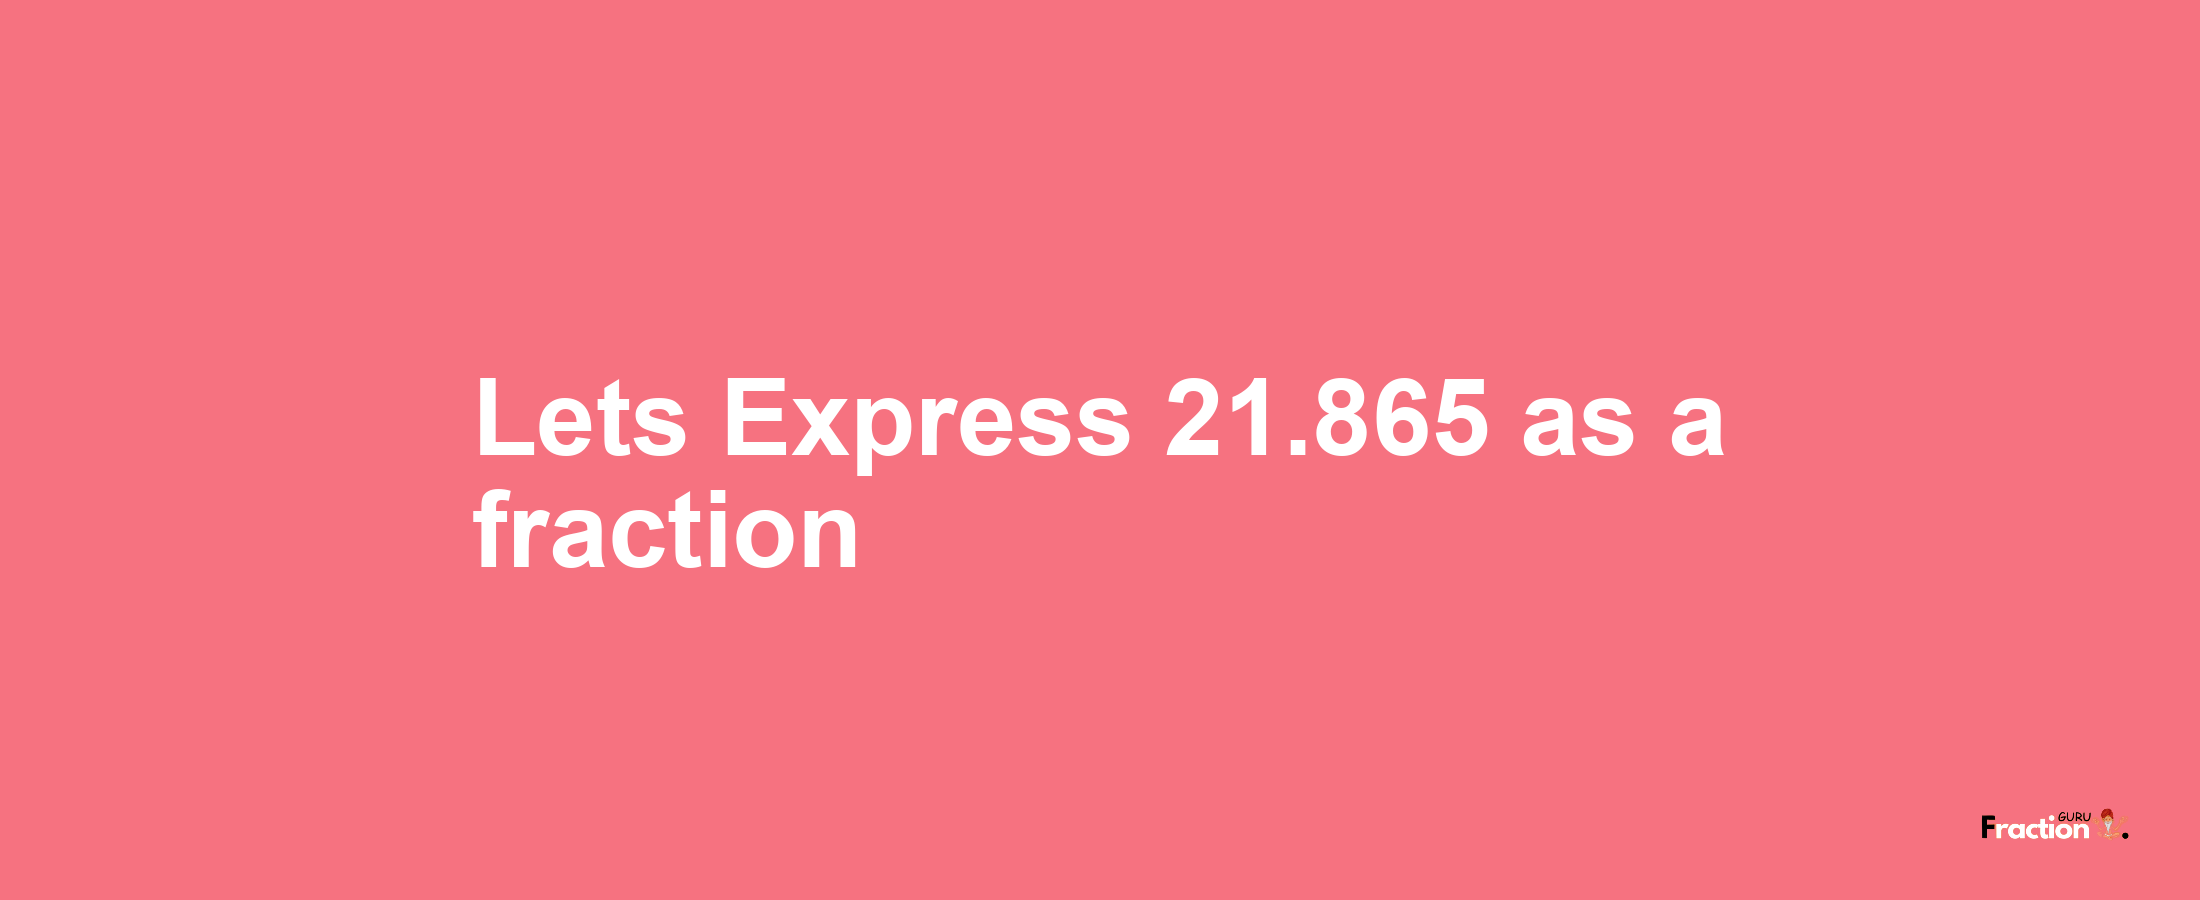 Lets Express 21.865 as afraction